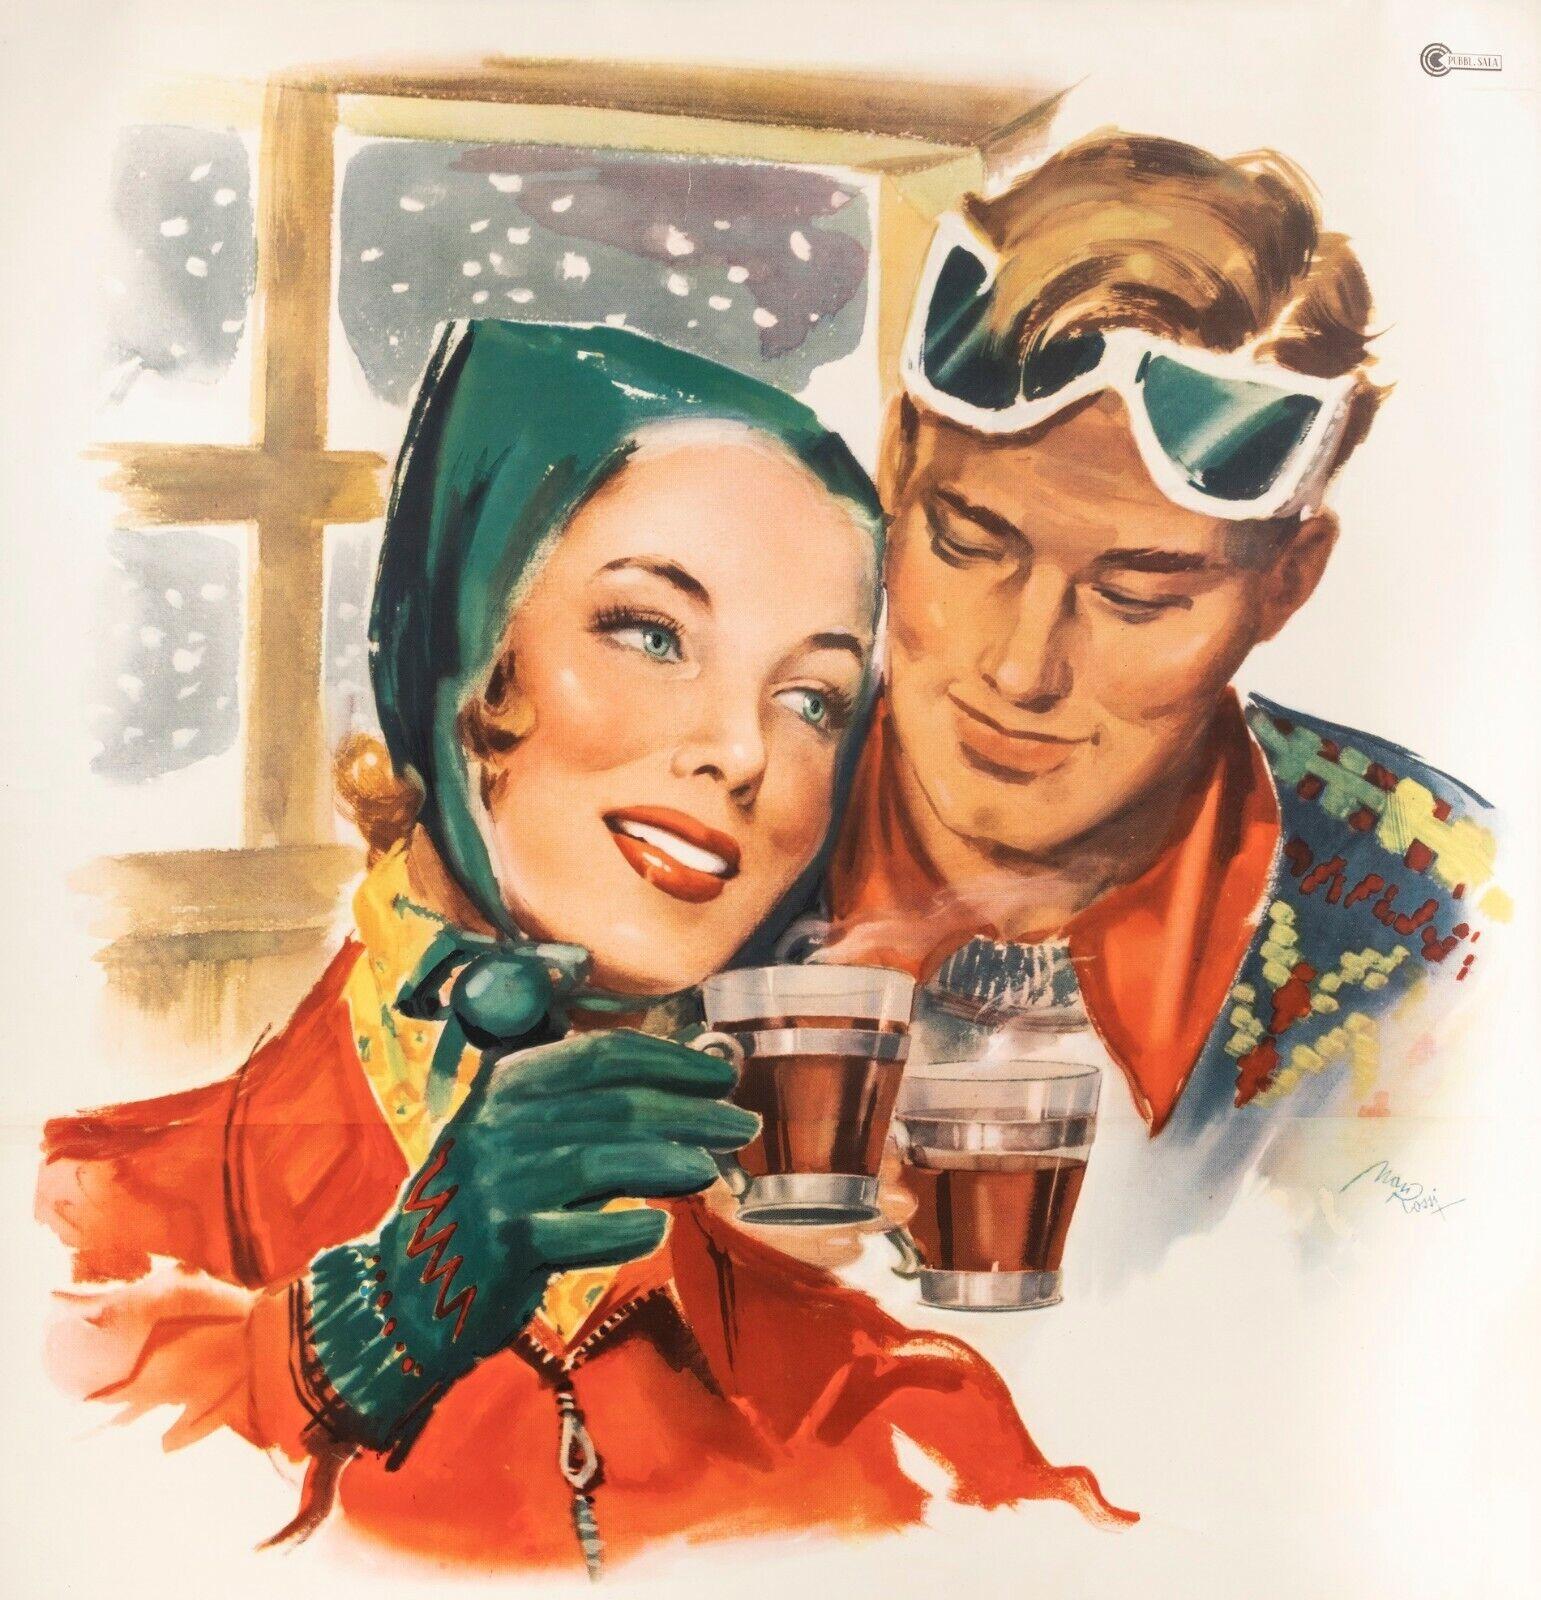 Original Vintage Poster-Rossi M.-China Martini-Quinquina-Ski, 1950

Promotion poster for the Italian appetizer China Martini.

It can also be drunk hot, mixed with warm lemon water. This is highlighted in this poster, where we see a couple warming